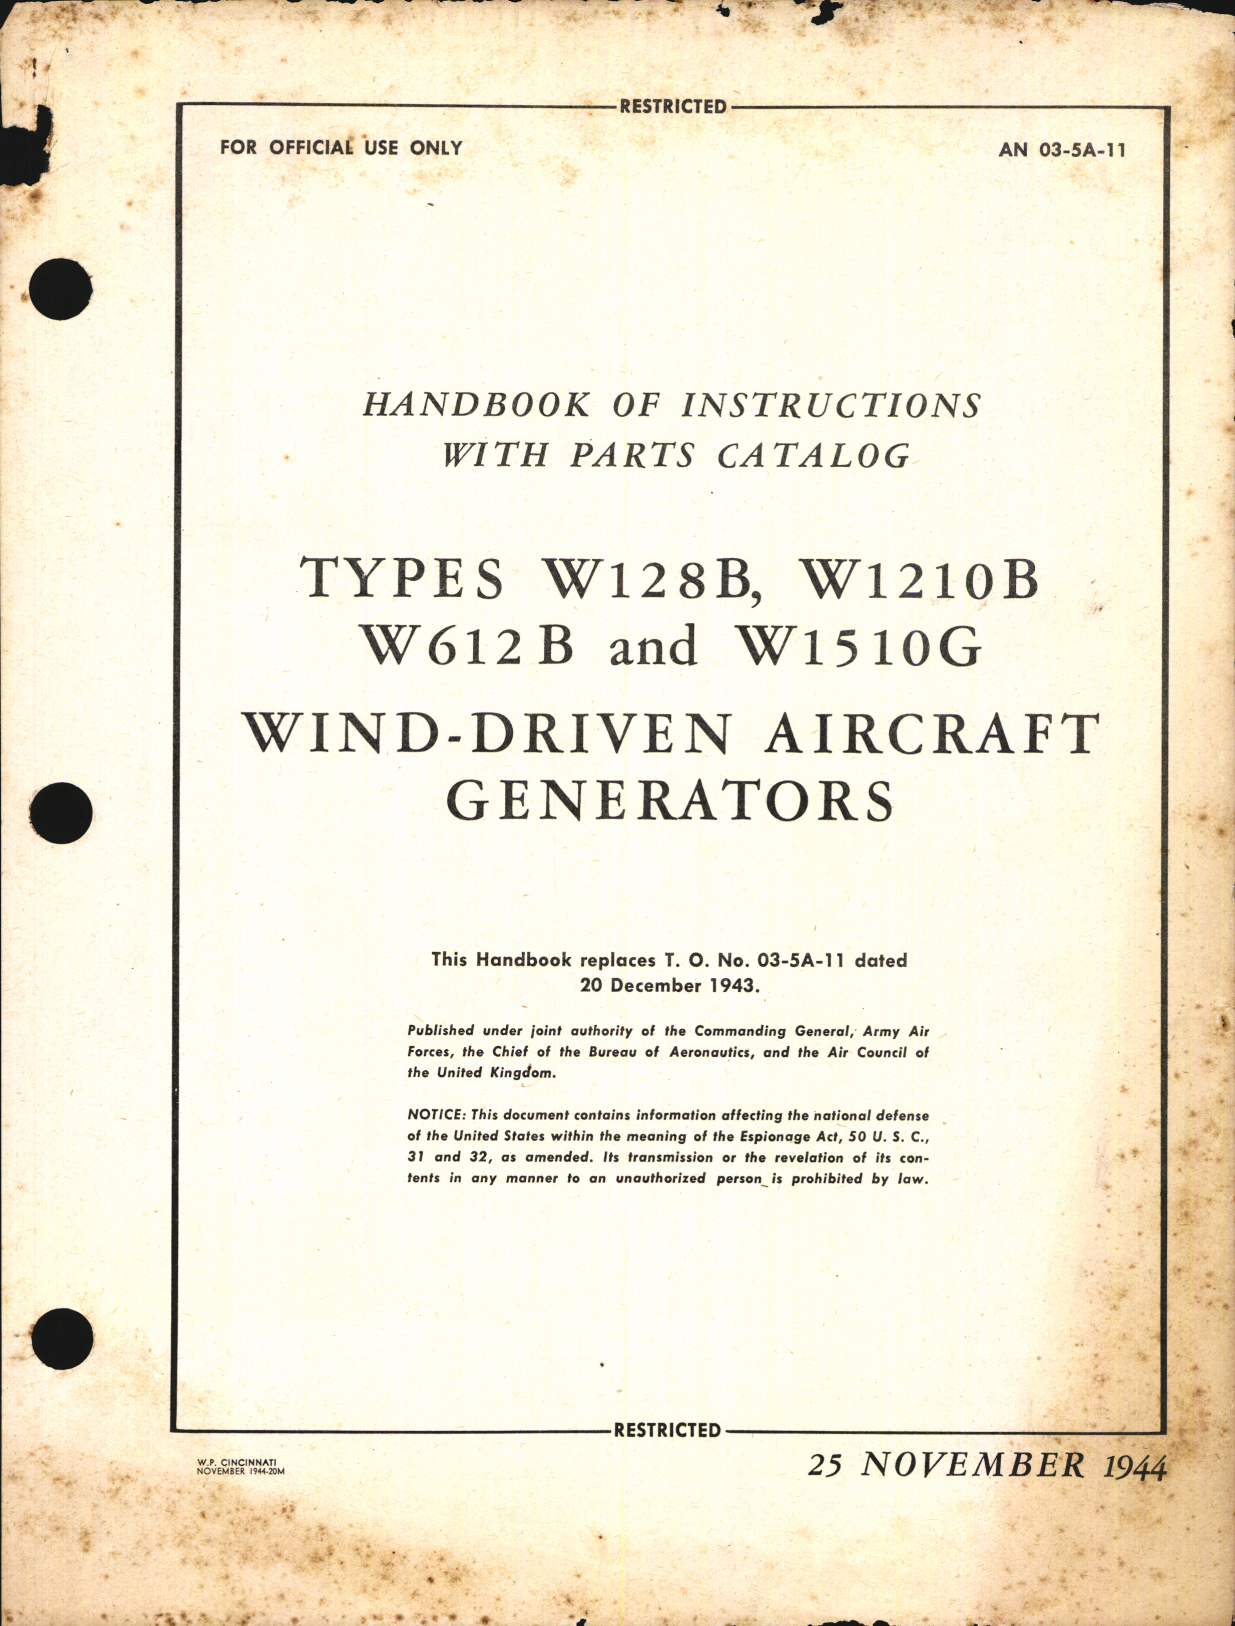 Sample page 1 from AirCorps Library document: Handbook of Instructions with Parts Catalog for Wind Driven Aircraft Generators